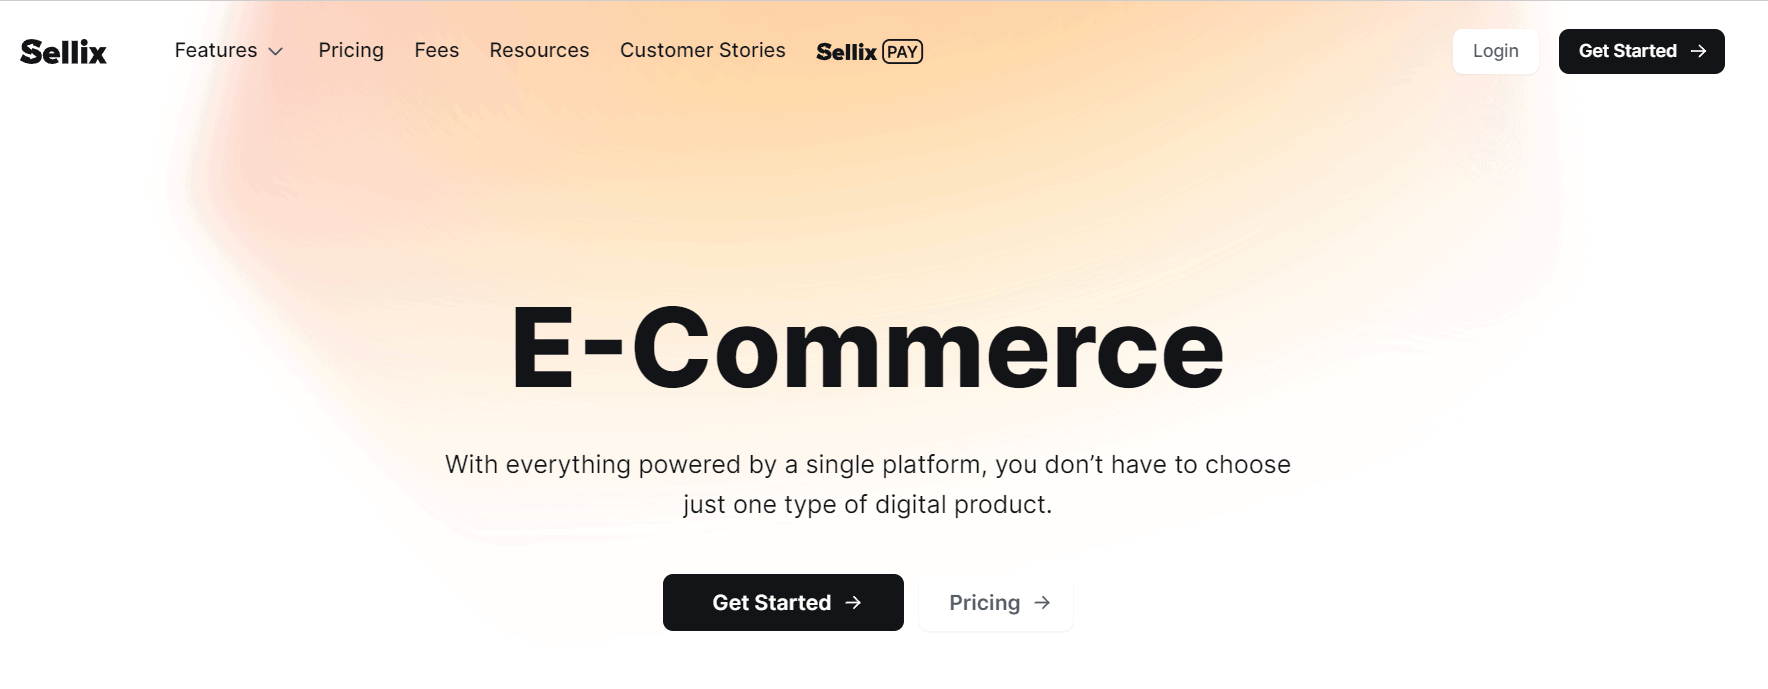 Sellix E-commerce Features Overview